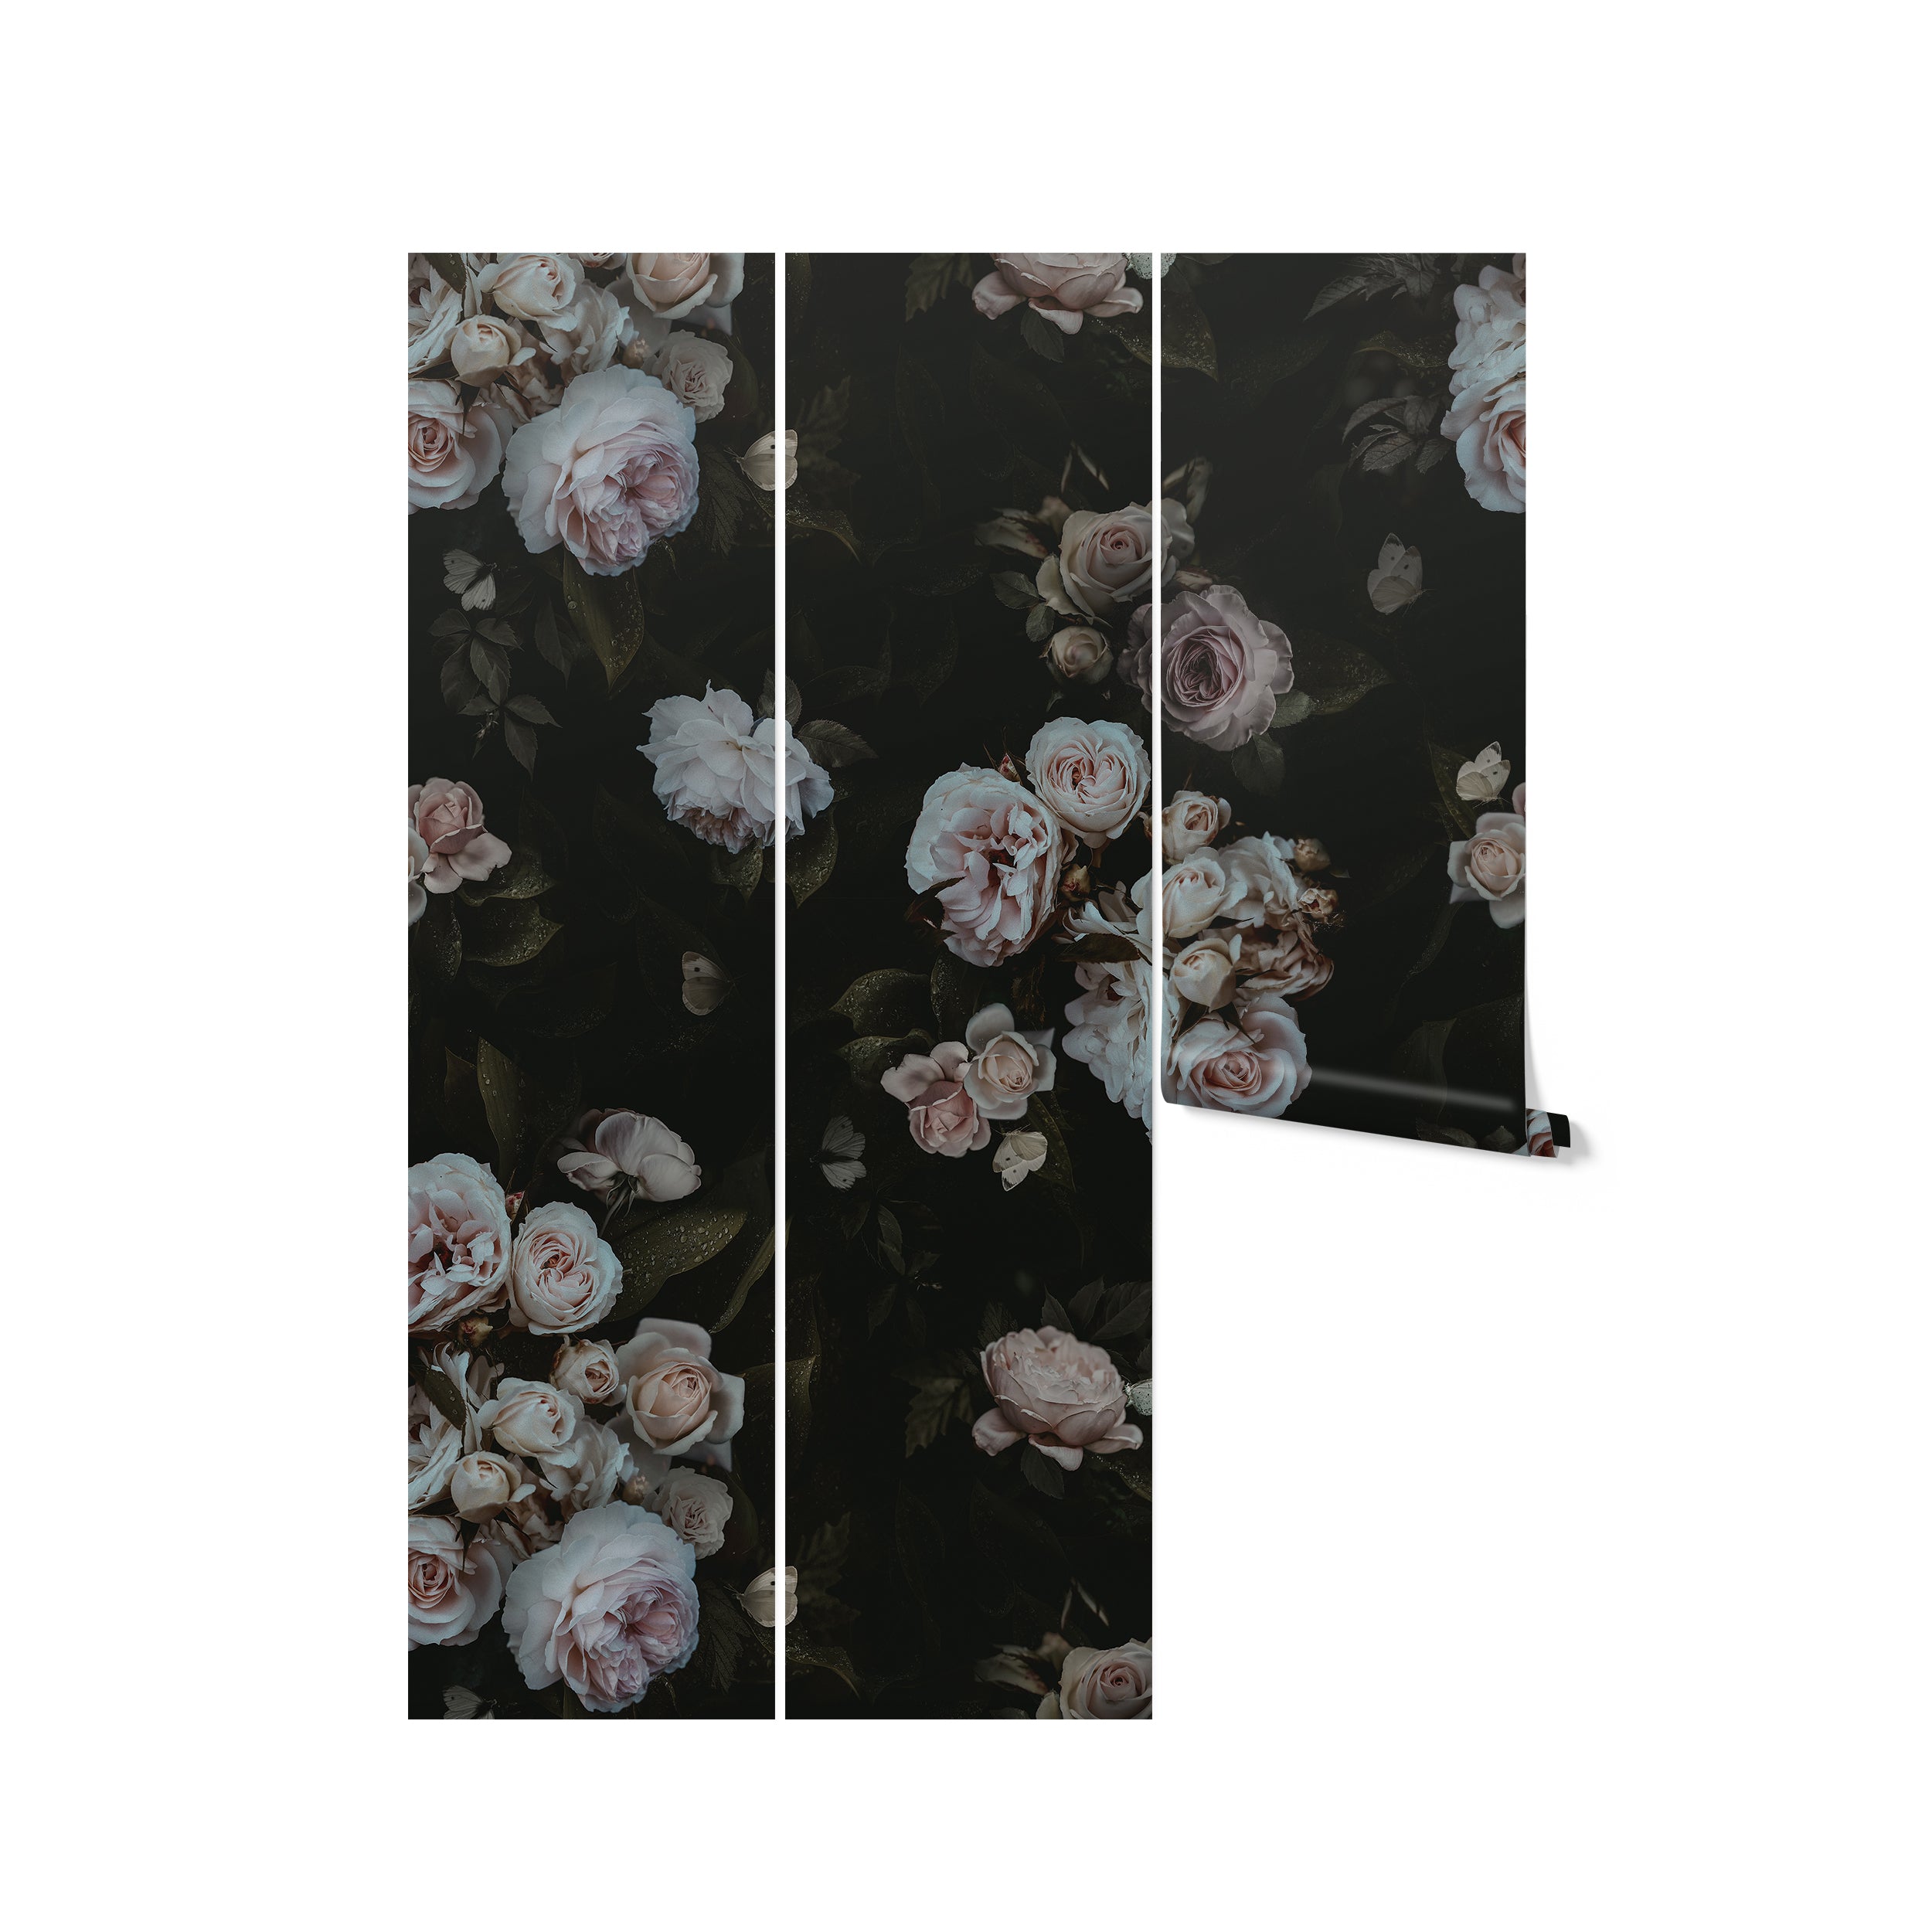 A roll of the Dark Rose Wallpaper - 75" partially unrolled, with the intricate roses and dark leaves unfurling against a stark black background, ready to add a touch of elegant drama to any interior space.